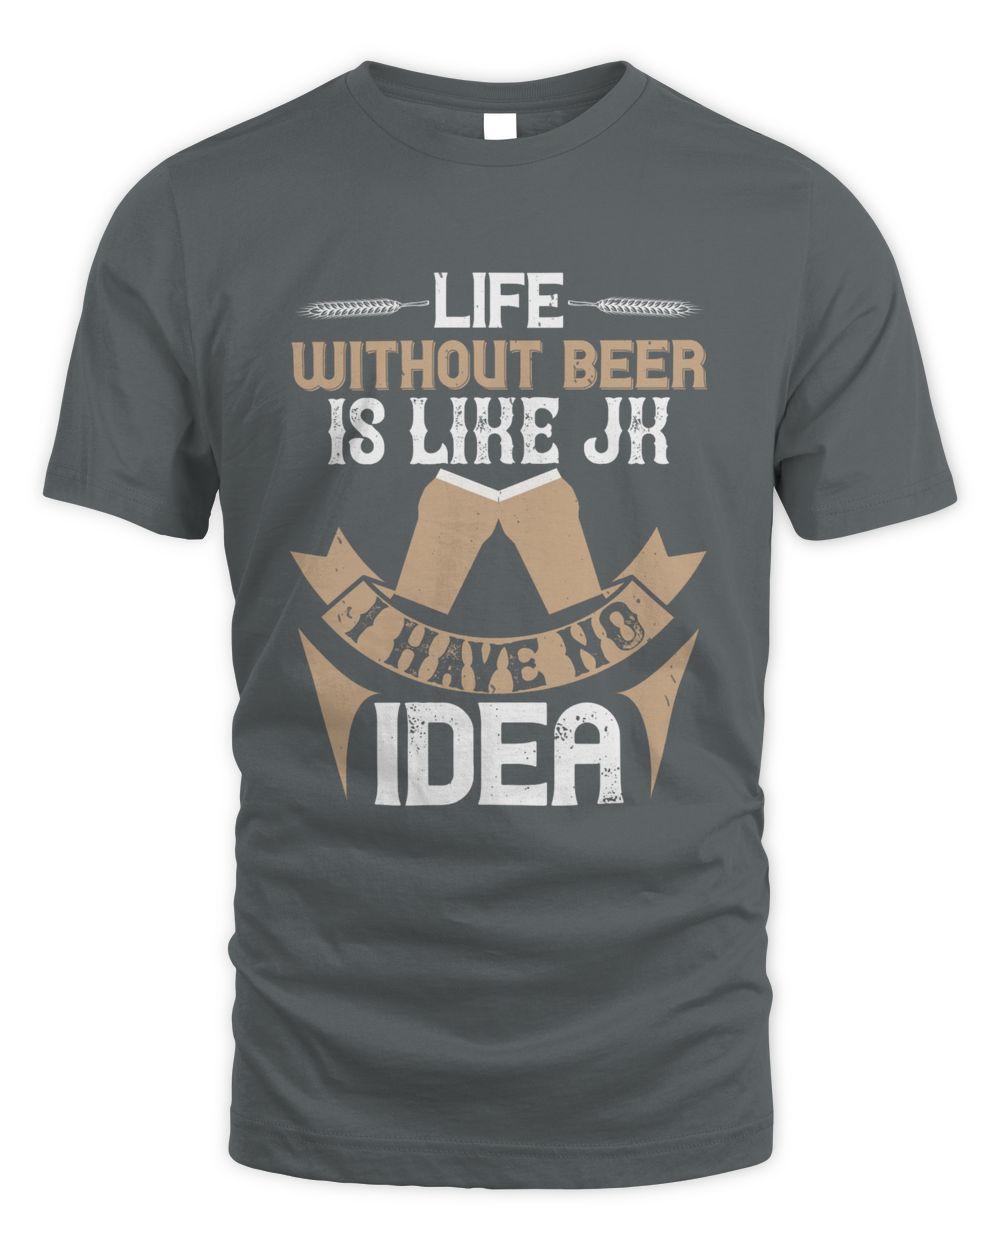 Life Without Beer Is Like Jk I Have No Idea Beer Shirt For Beer Lover With Free Shipping, Great Gift For Fathers Day Unisex Standard T-Shirt charcoal 